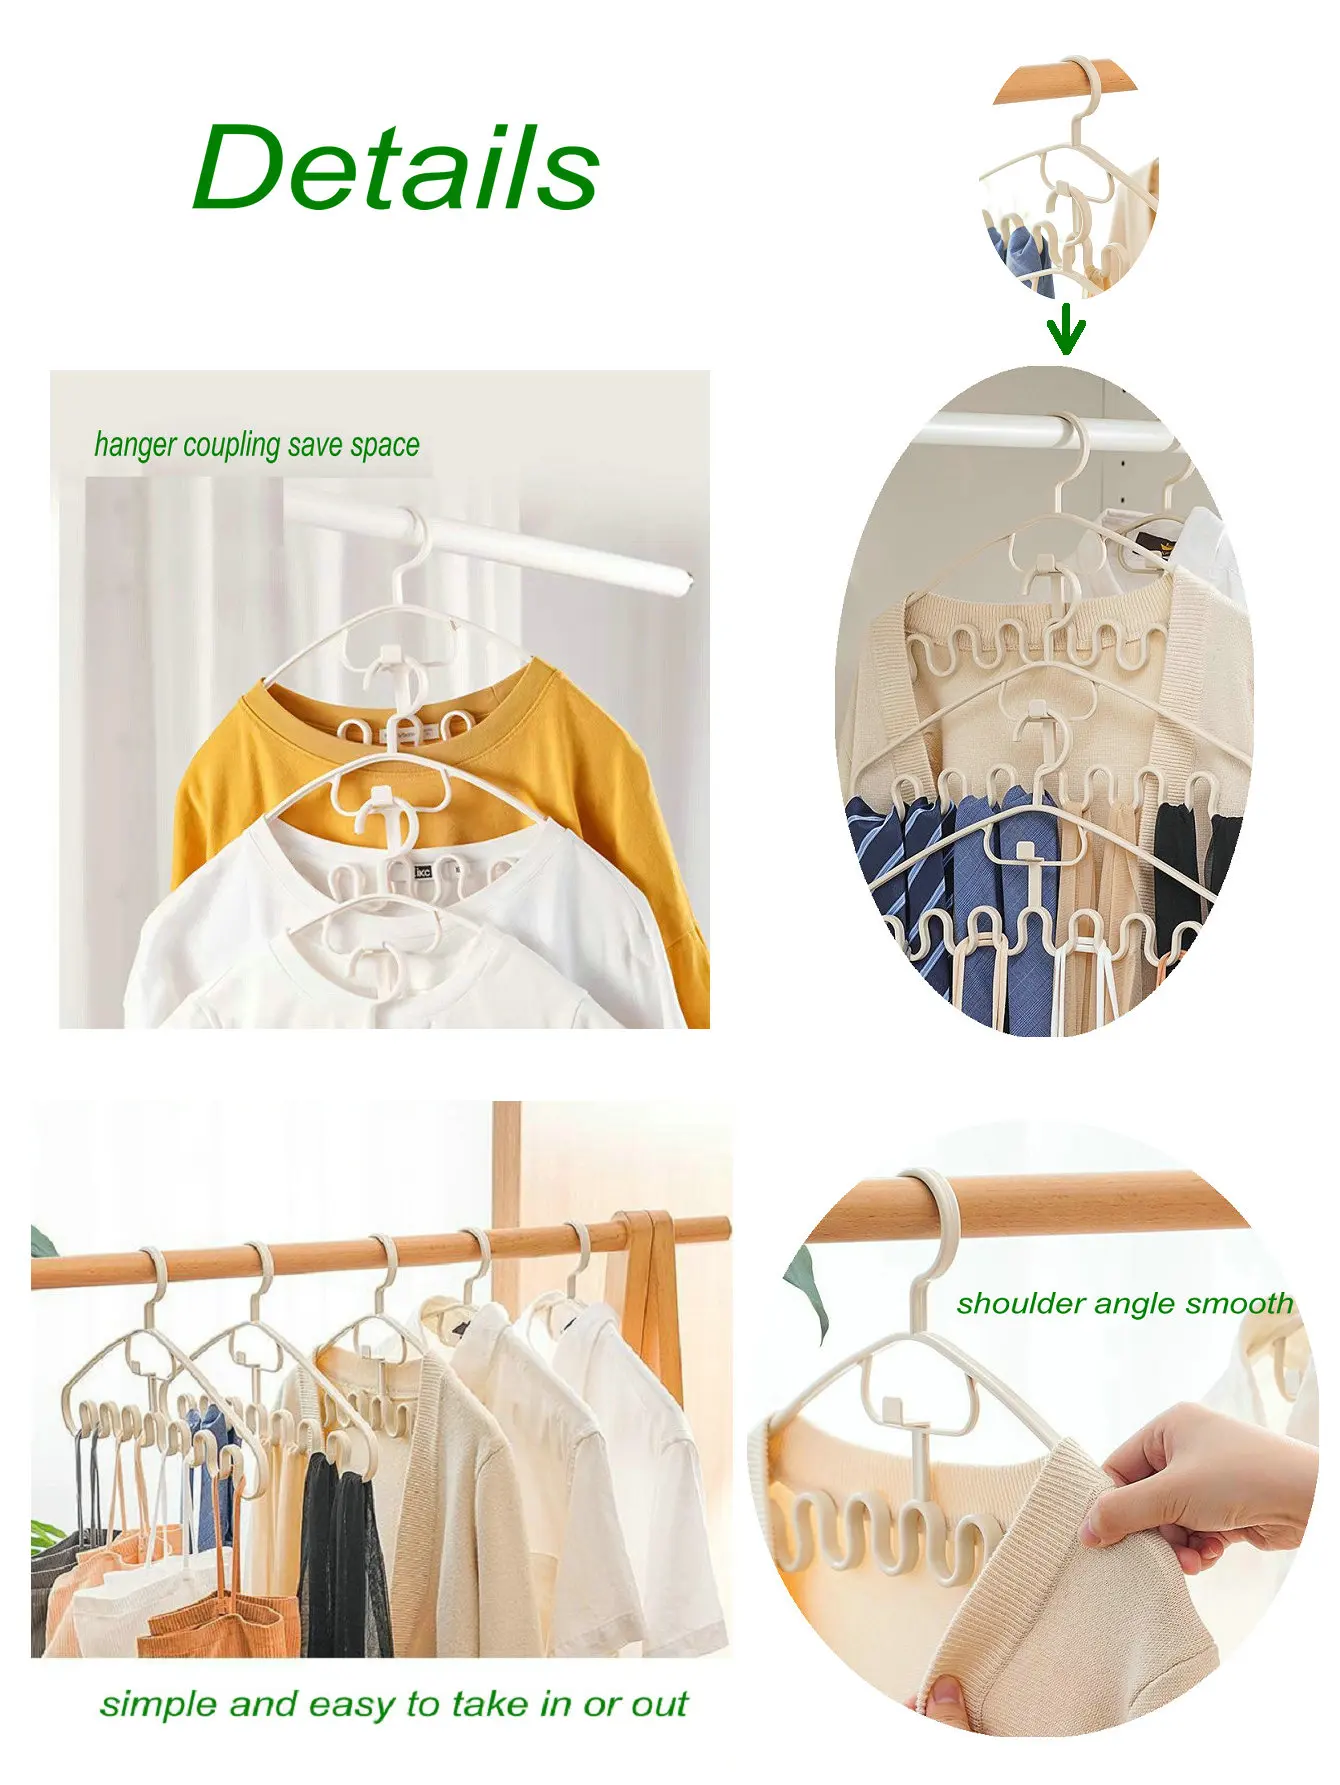 10pcs Multifunctional Wave-shaped Adult Clothes Hangers